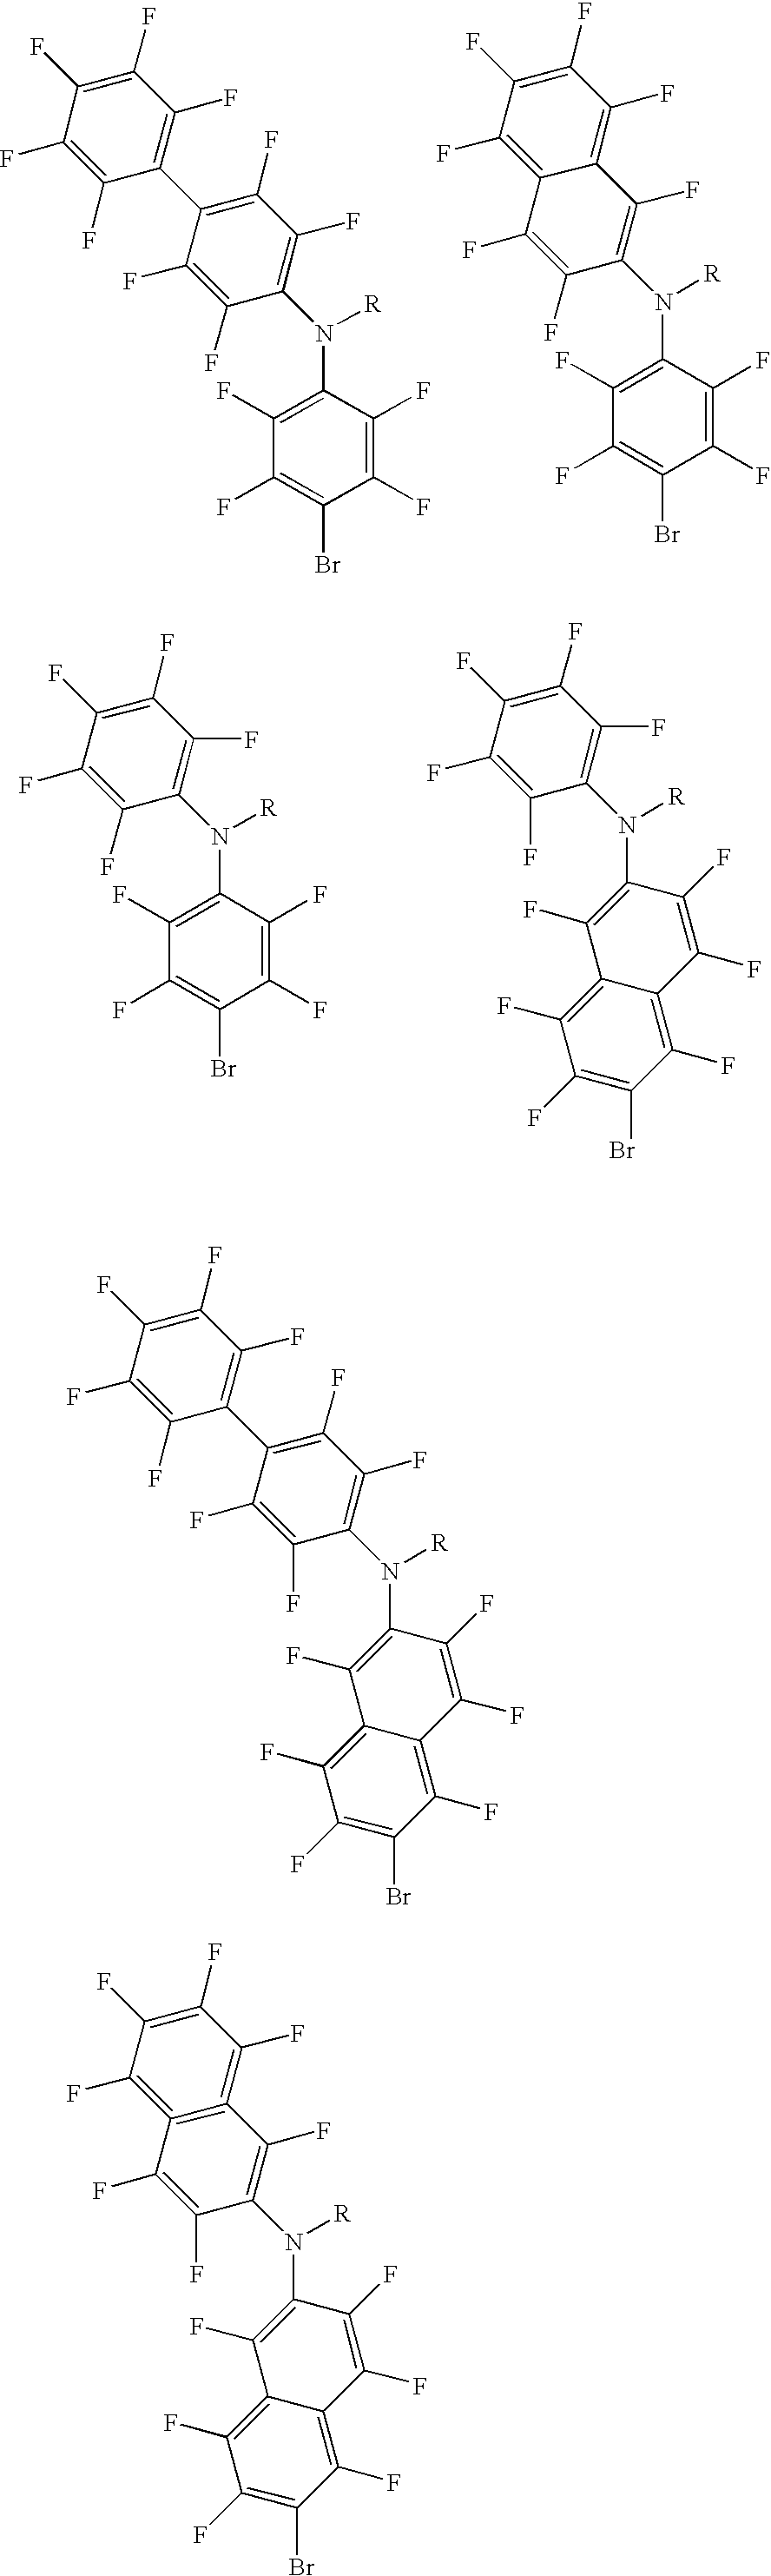 Polyolefins made by catalyst comprising a noncoordinating anion and articles comprising them